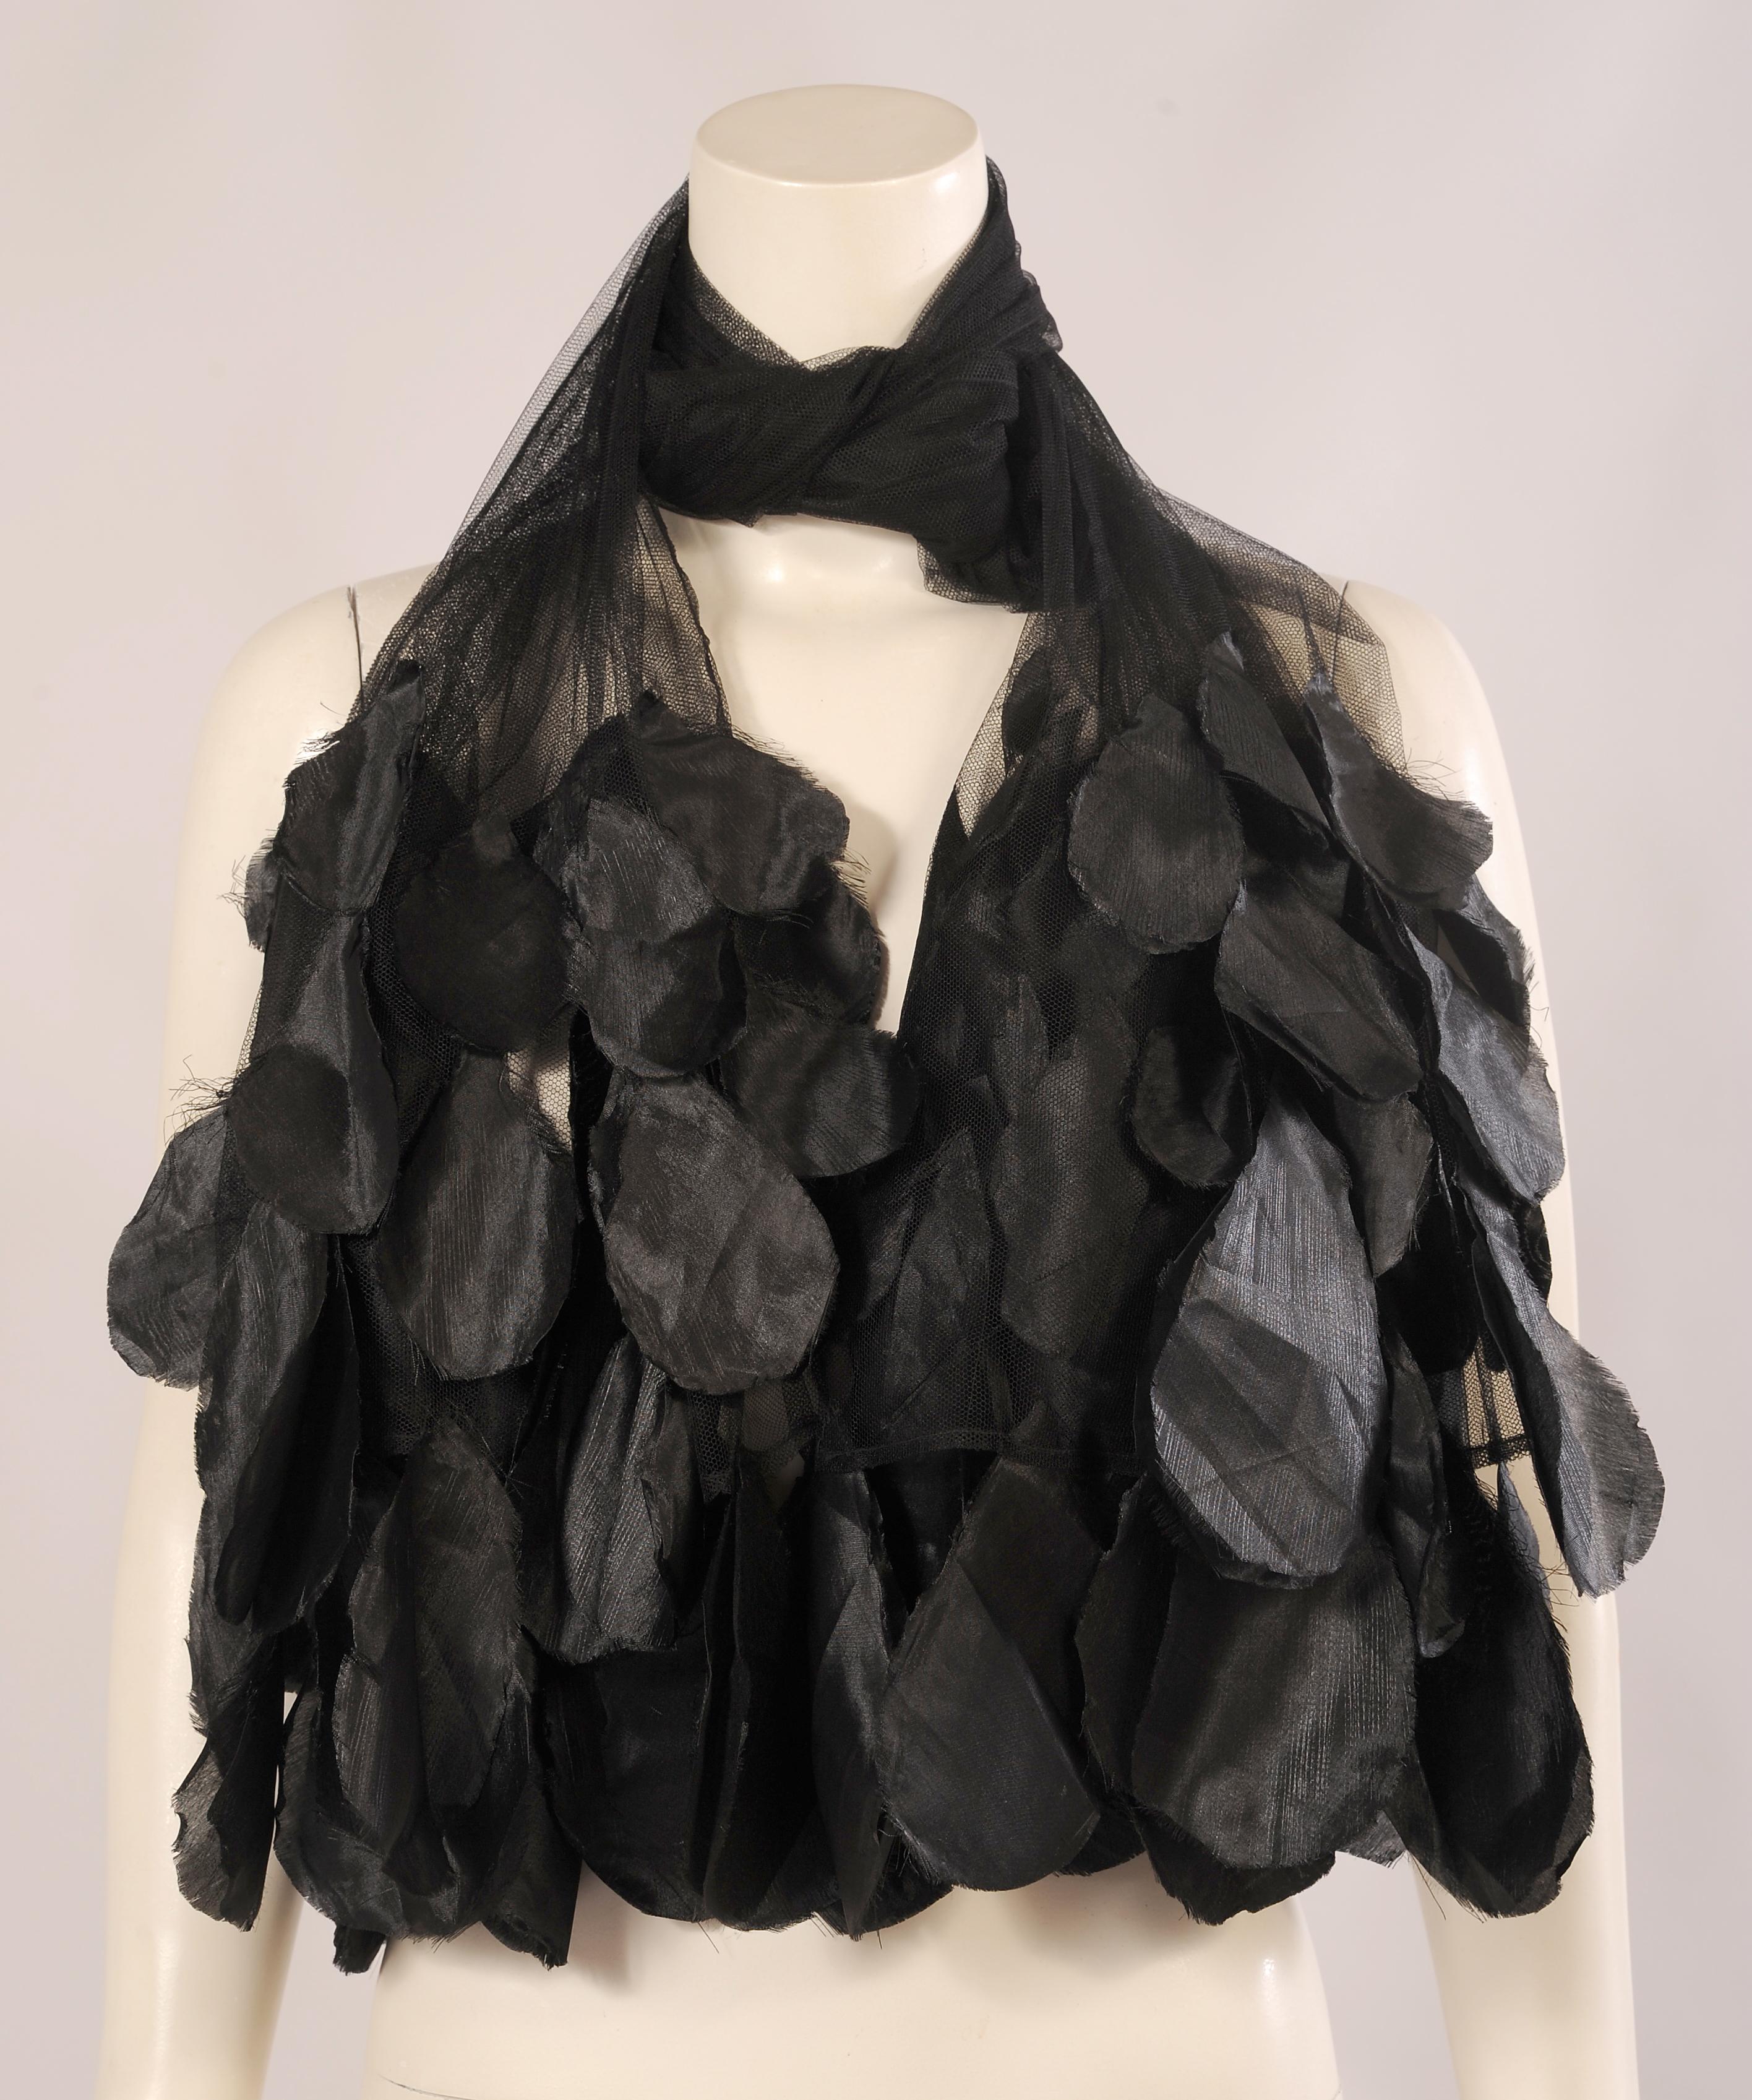 This ultra feminine tulle shawl is embellished with black silk flower petals at each end. The tulle is in perfect condition and one size fits all.
Measurements;
Length 84